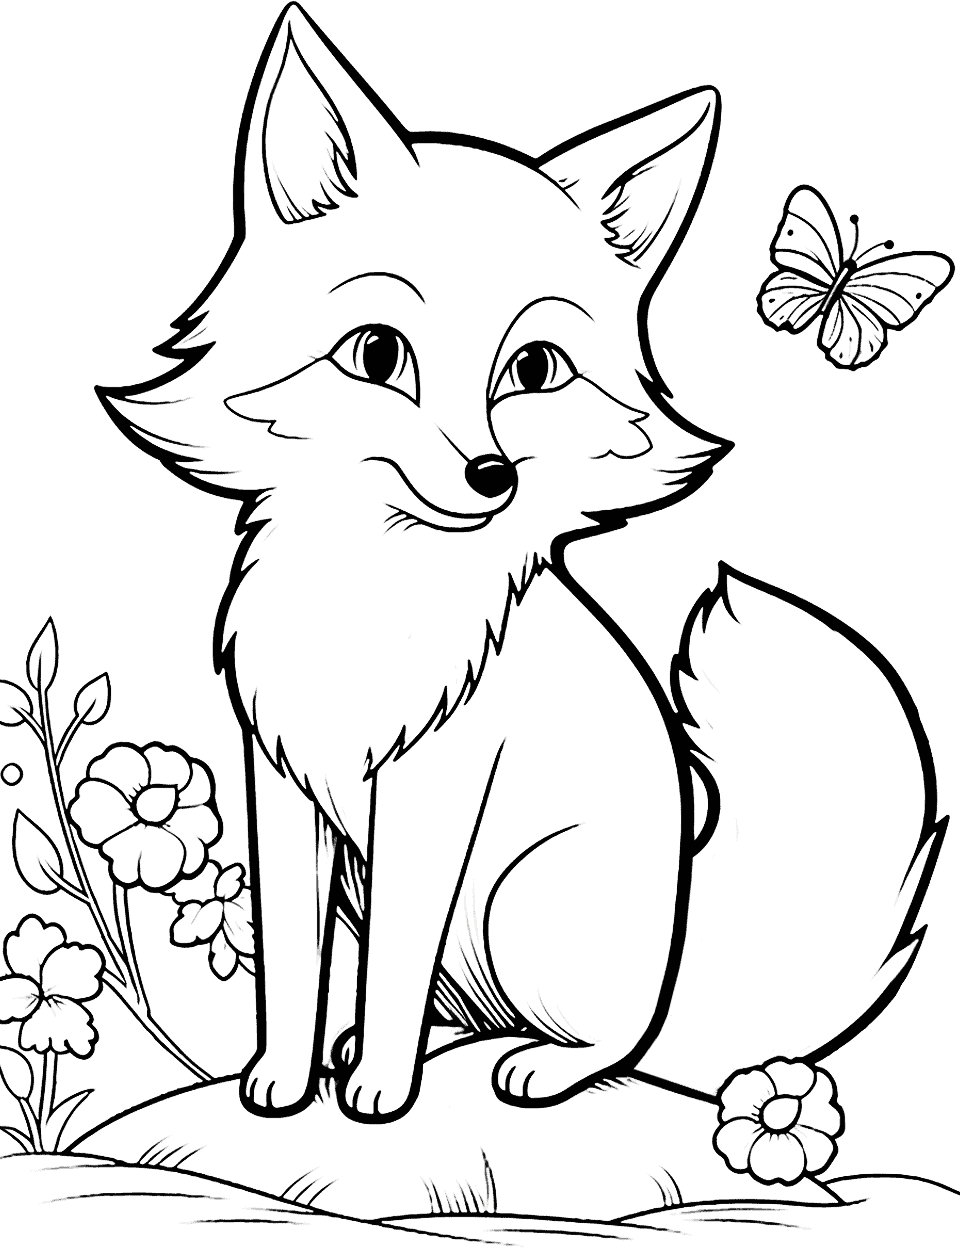 Cute Fox Sitting Coloring Page - A delightful fox sitting comfortably, surrounded by soft flowers and butterflies.